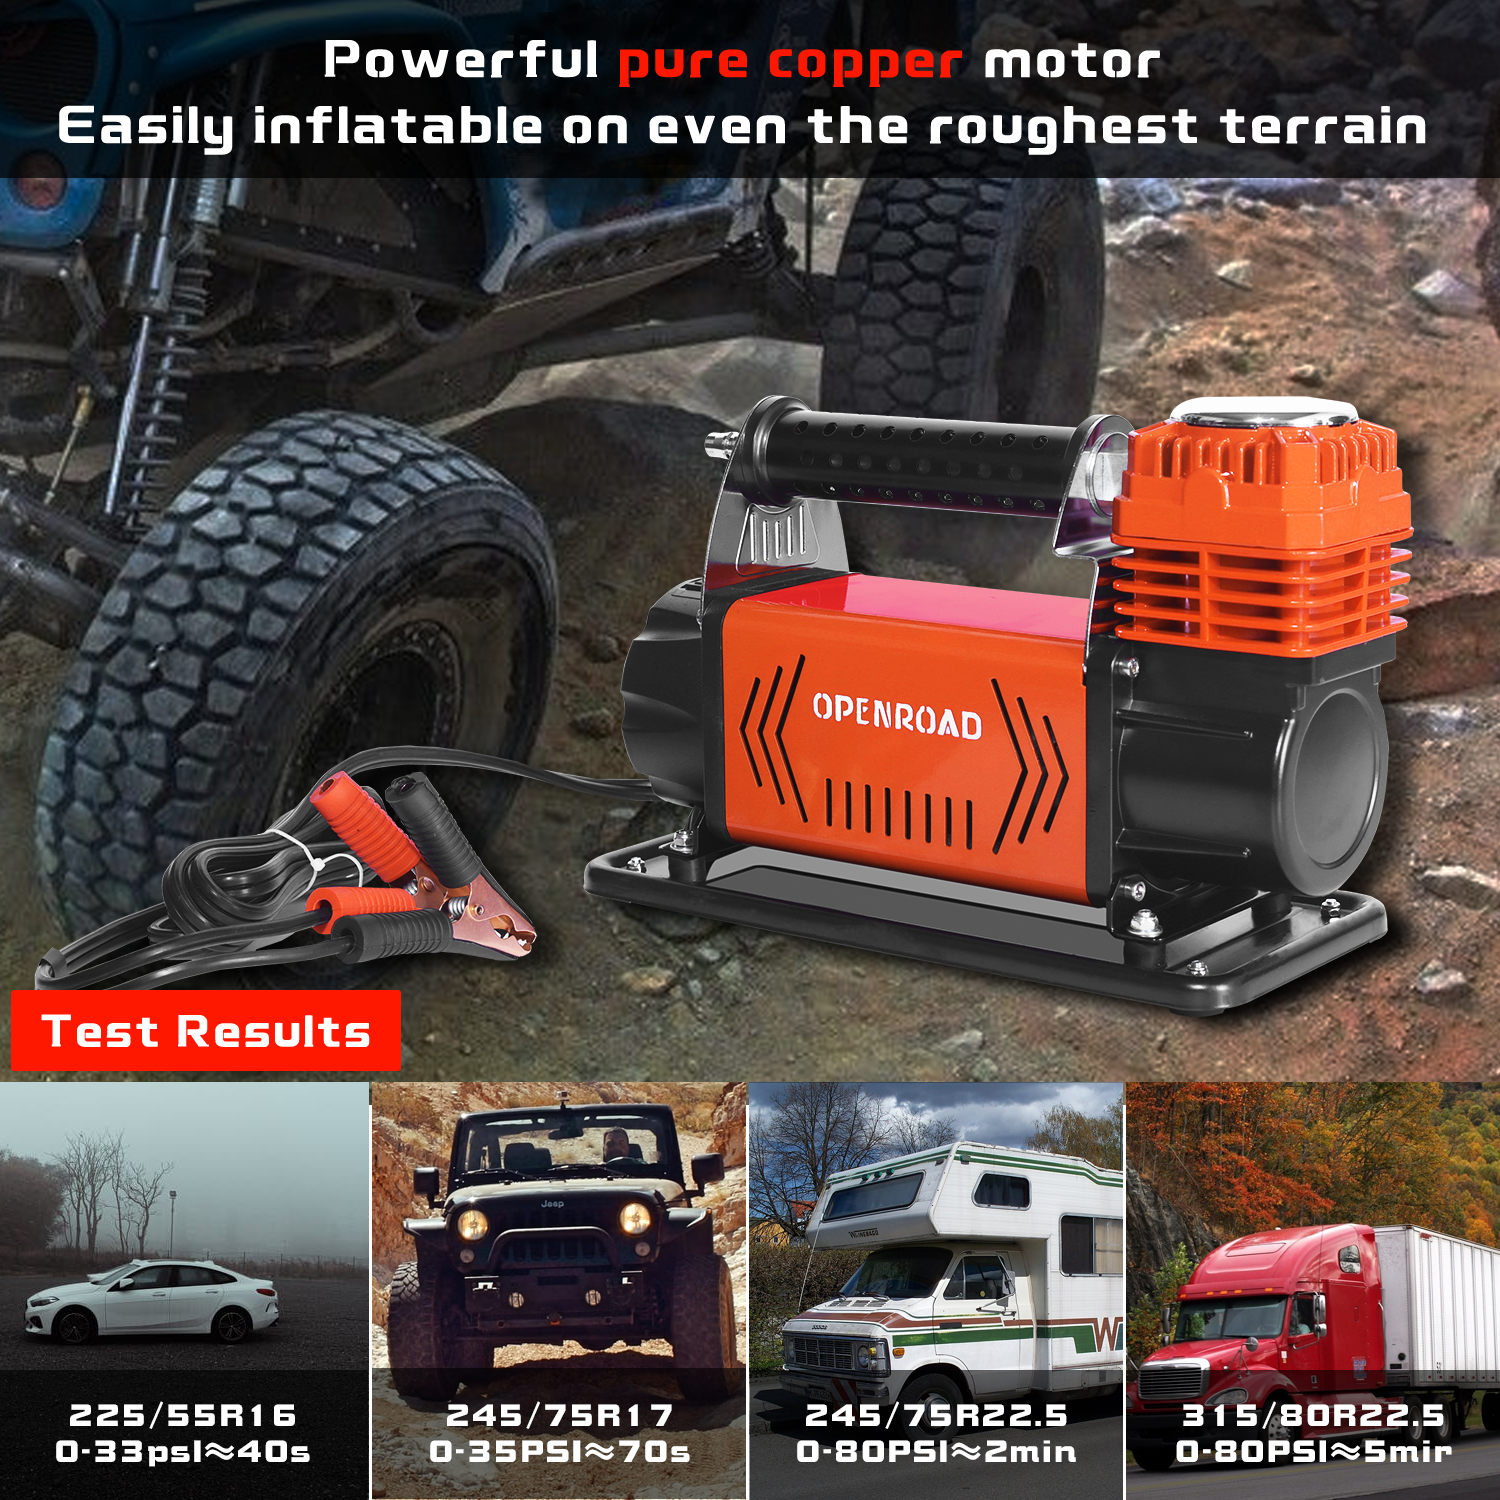 OPENROAD 12V Portable Inflator Air Compressor Heavy Duty, 5.65CFM Truck Tires Inflator, Offroad Air Compressor Kit for Car Tires 150PSI Air Compressor OPENROAD   